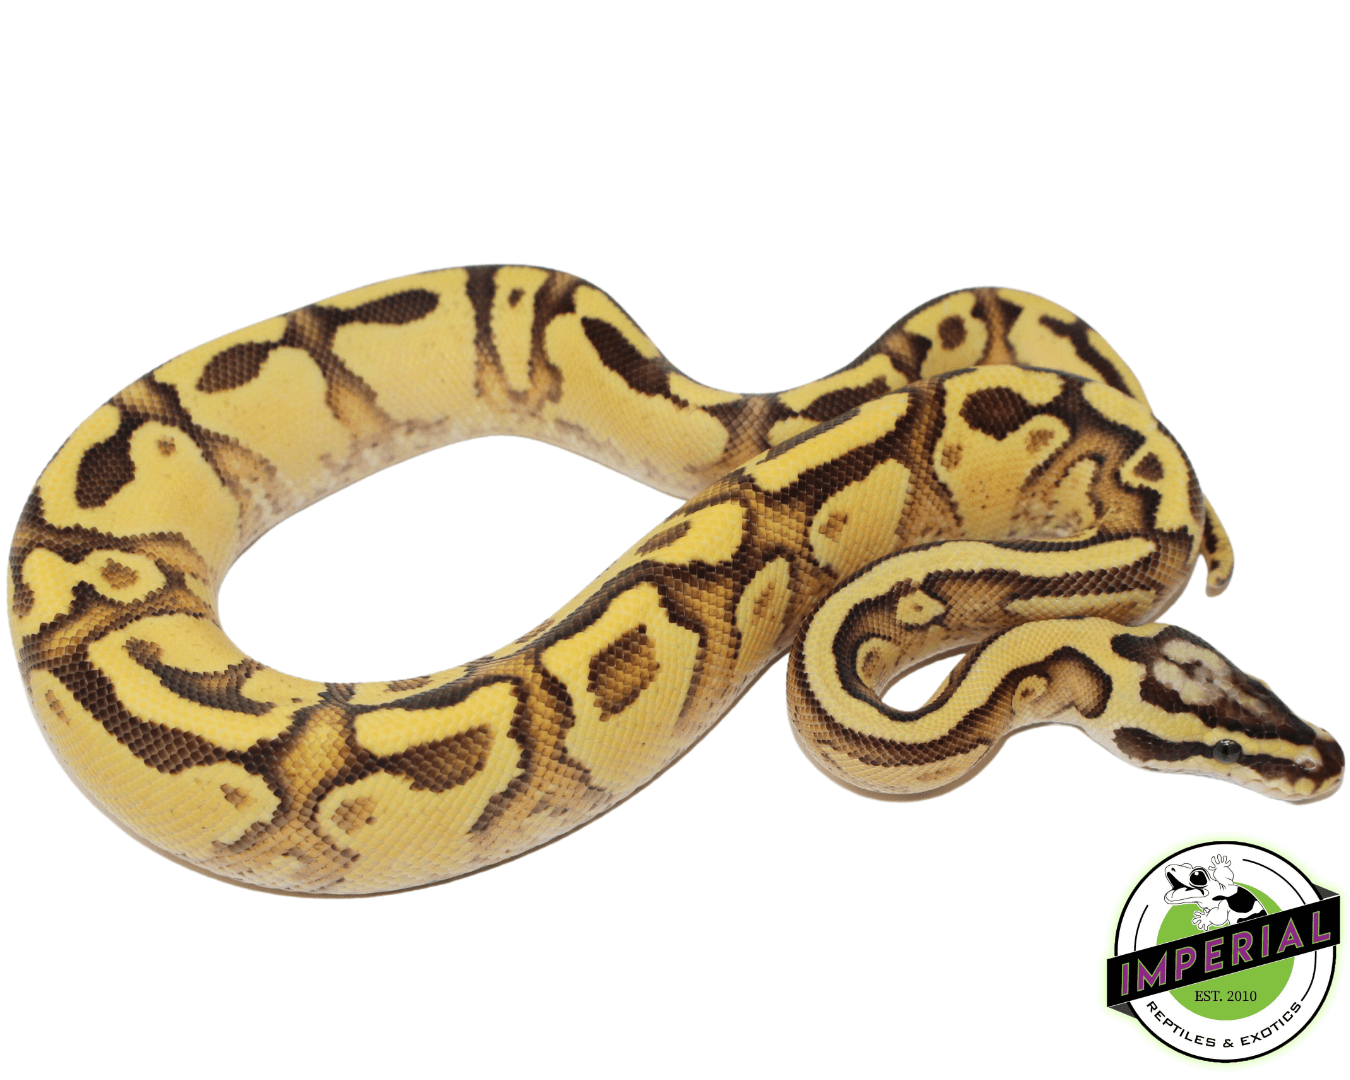 Firefly Enchi Yellowbelly ball python for sale, buy reptiles online